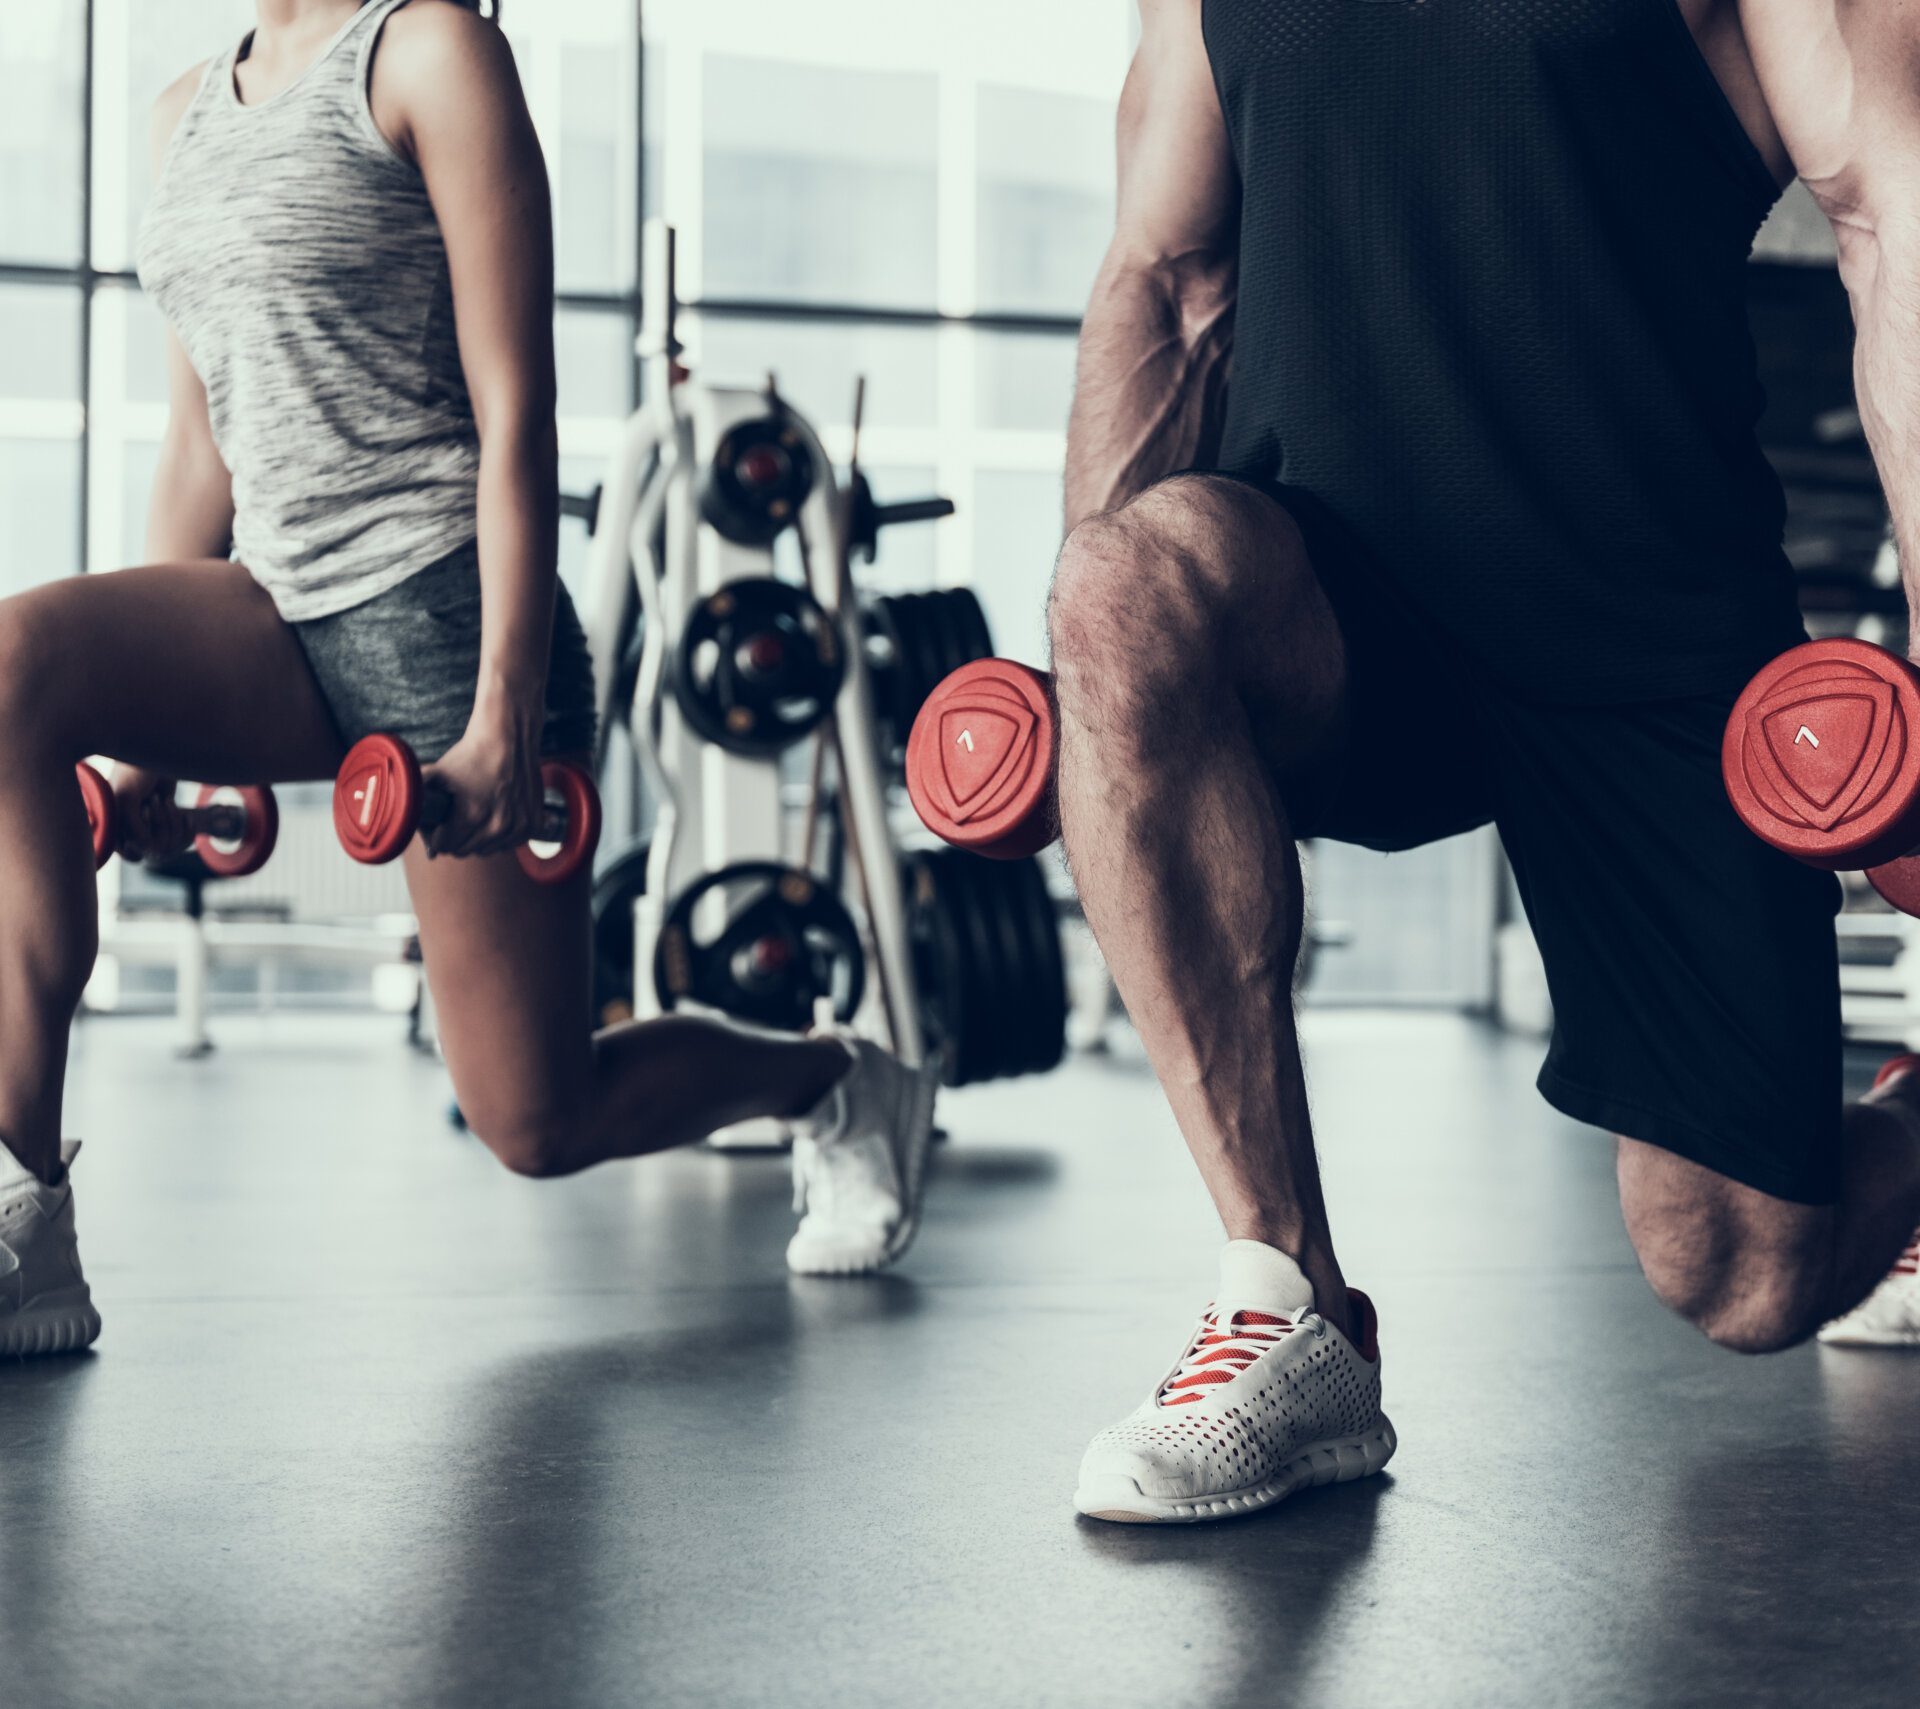 Close up. Man and Woman Training in Fitness Club. Man with Athletic Body. Healthy Lifestyle and Sport Concepts. Young Woman in Training Club. Active Indoor Training. Sport Equipment in Club.